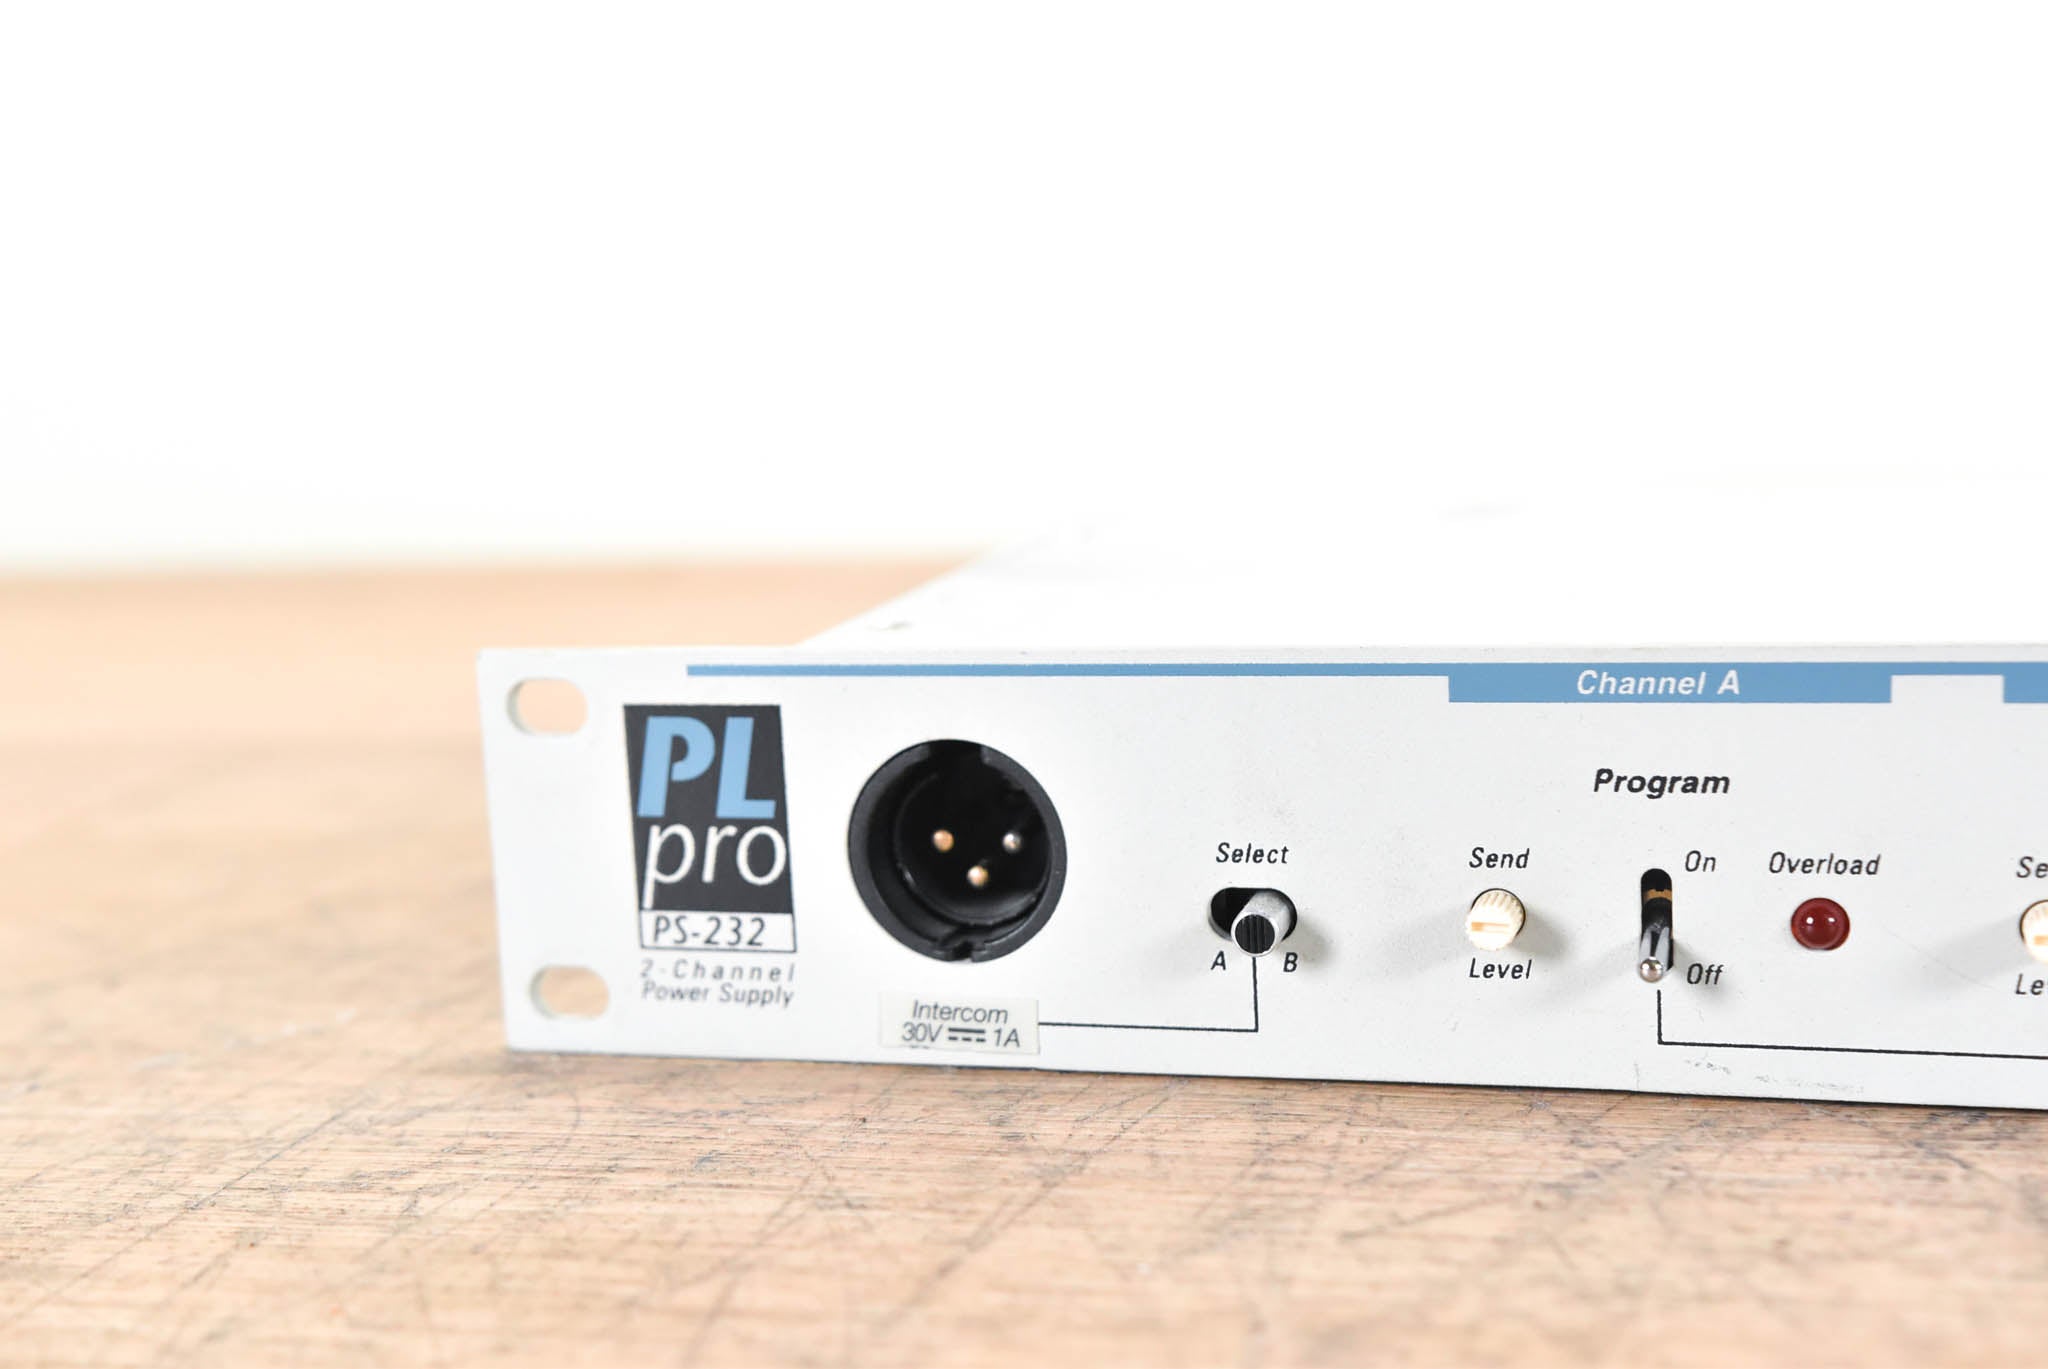 Clear-Com PS-232 Two-Channel Intercom Power Supply